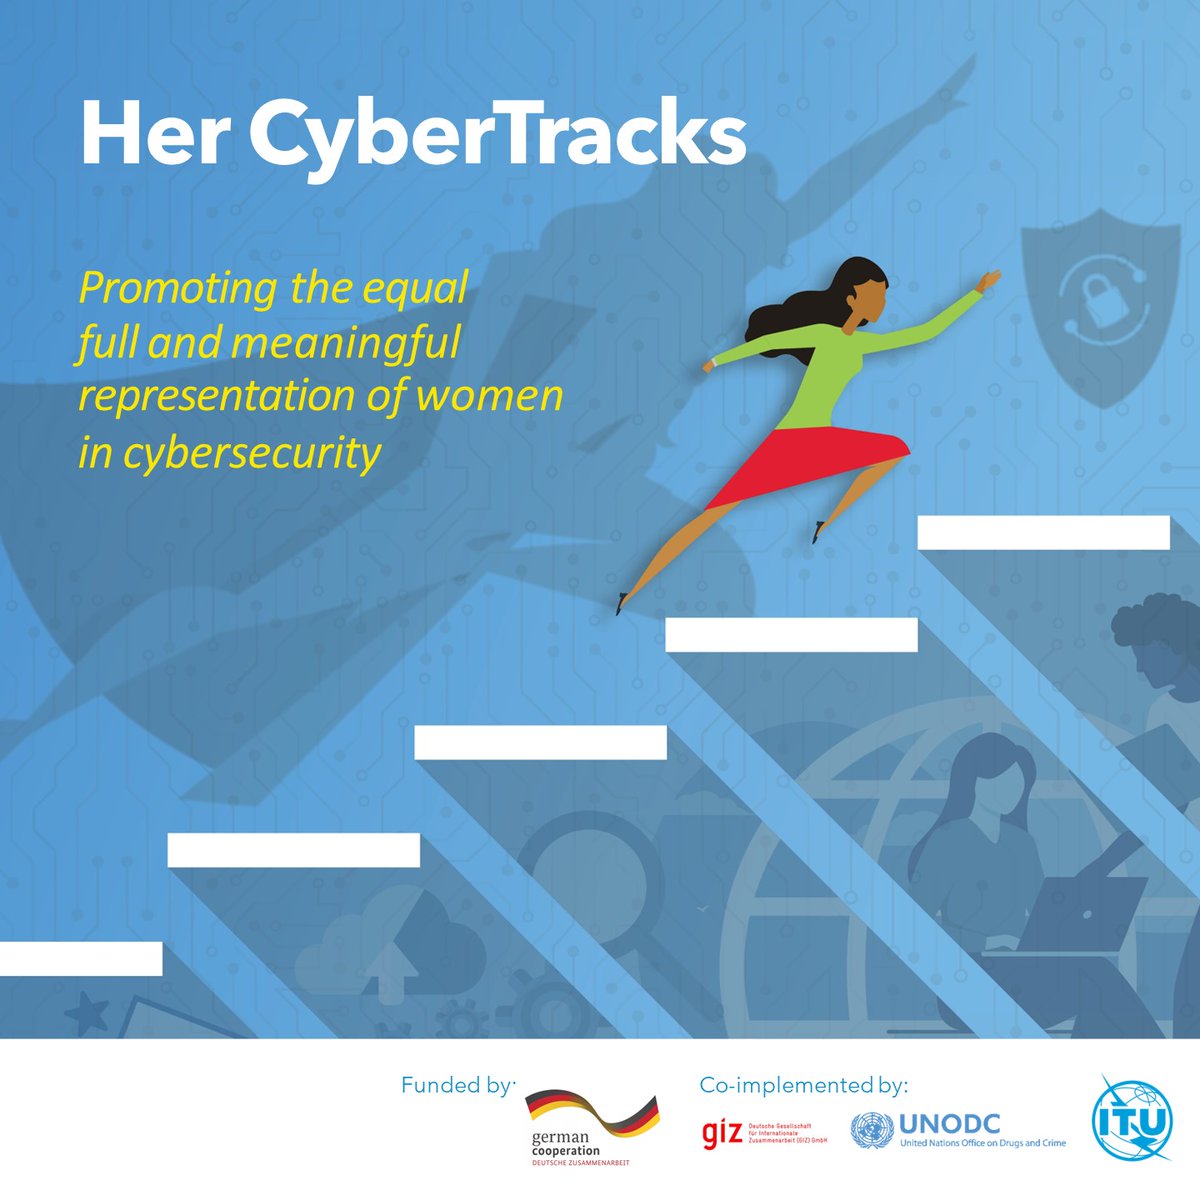 👩‍💻 Apply now to participate in #HerCyberTracks with training, networking and mentorship to propel the next generation of #womenInCybersecurity into leadership roles itu.int/en/ITU-D/Cyber…